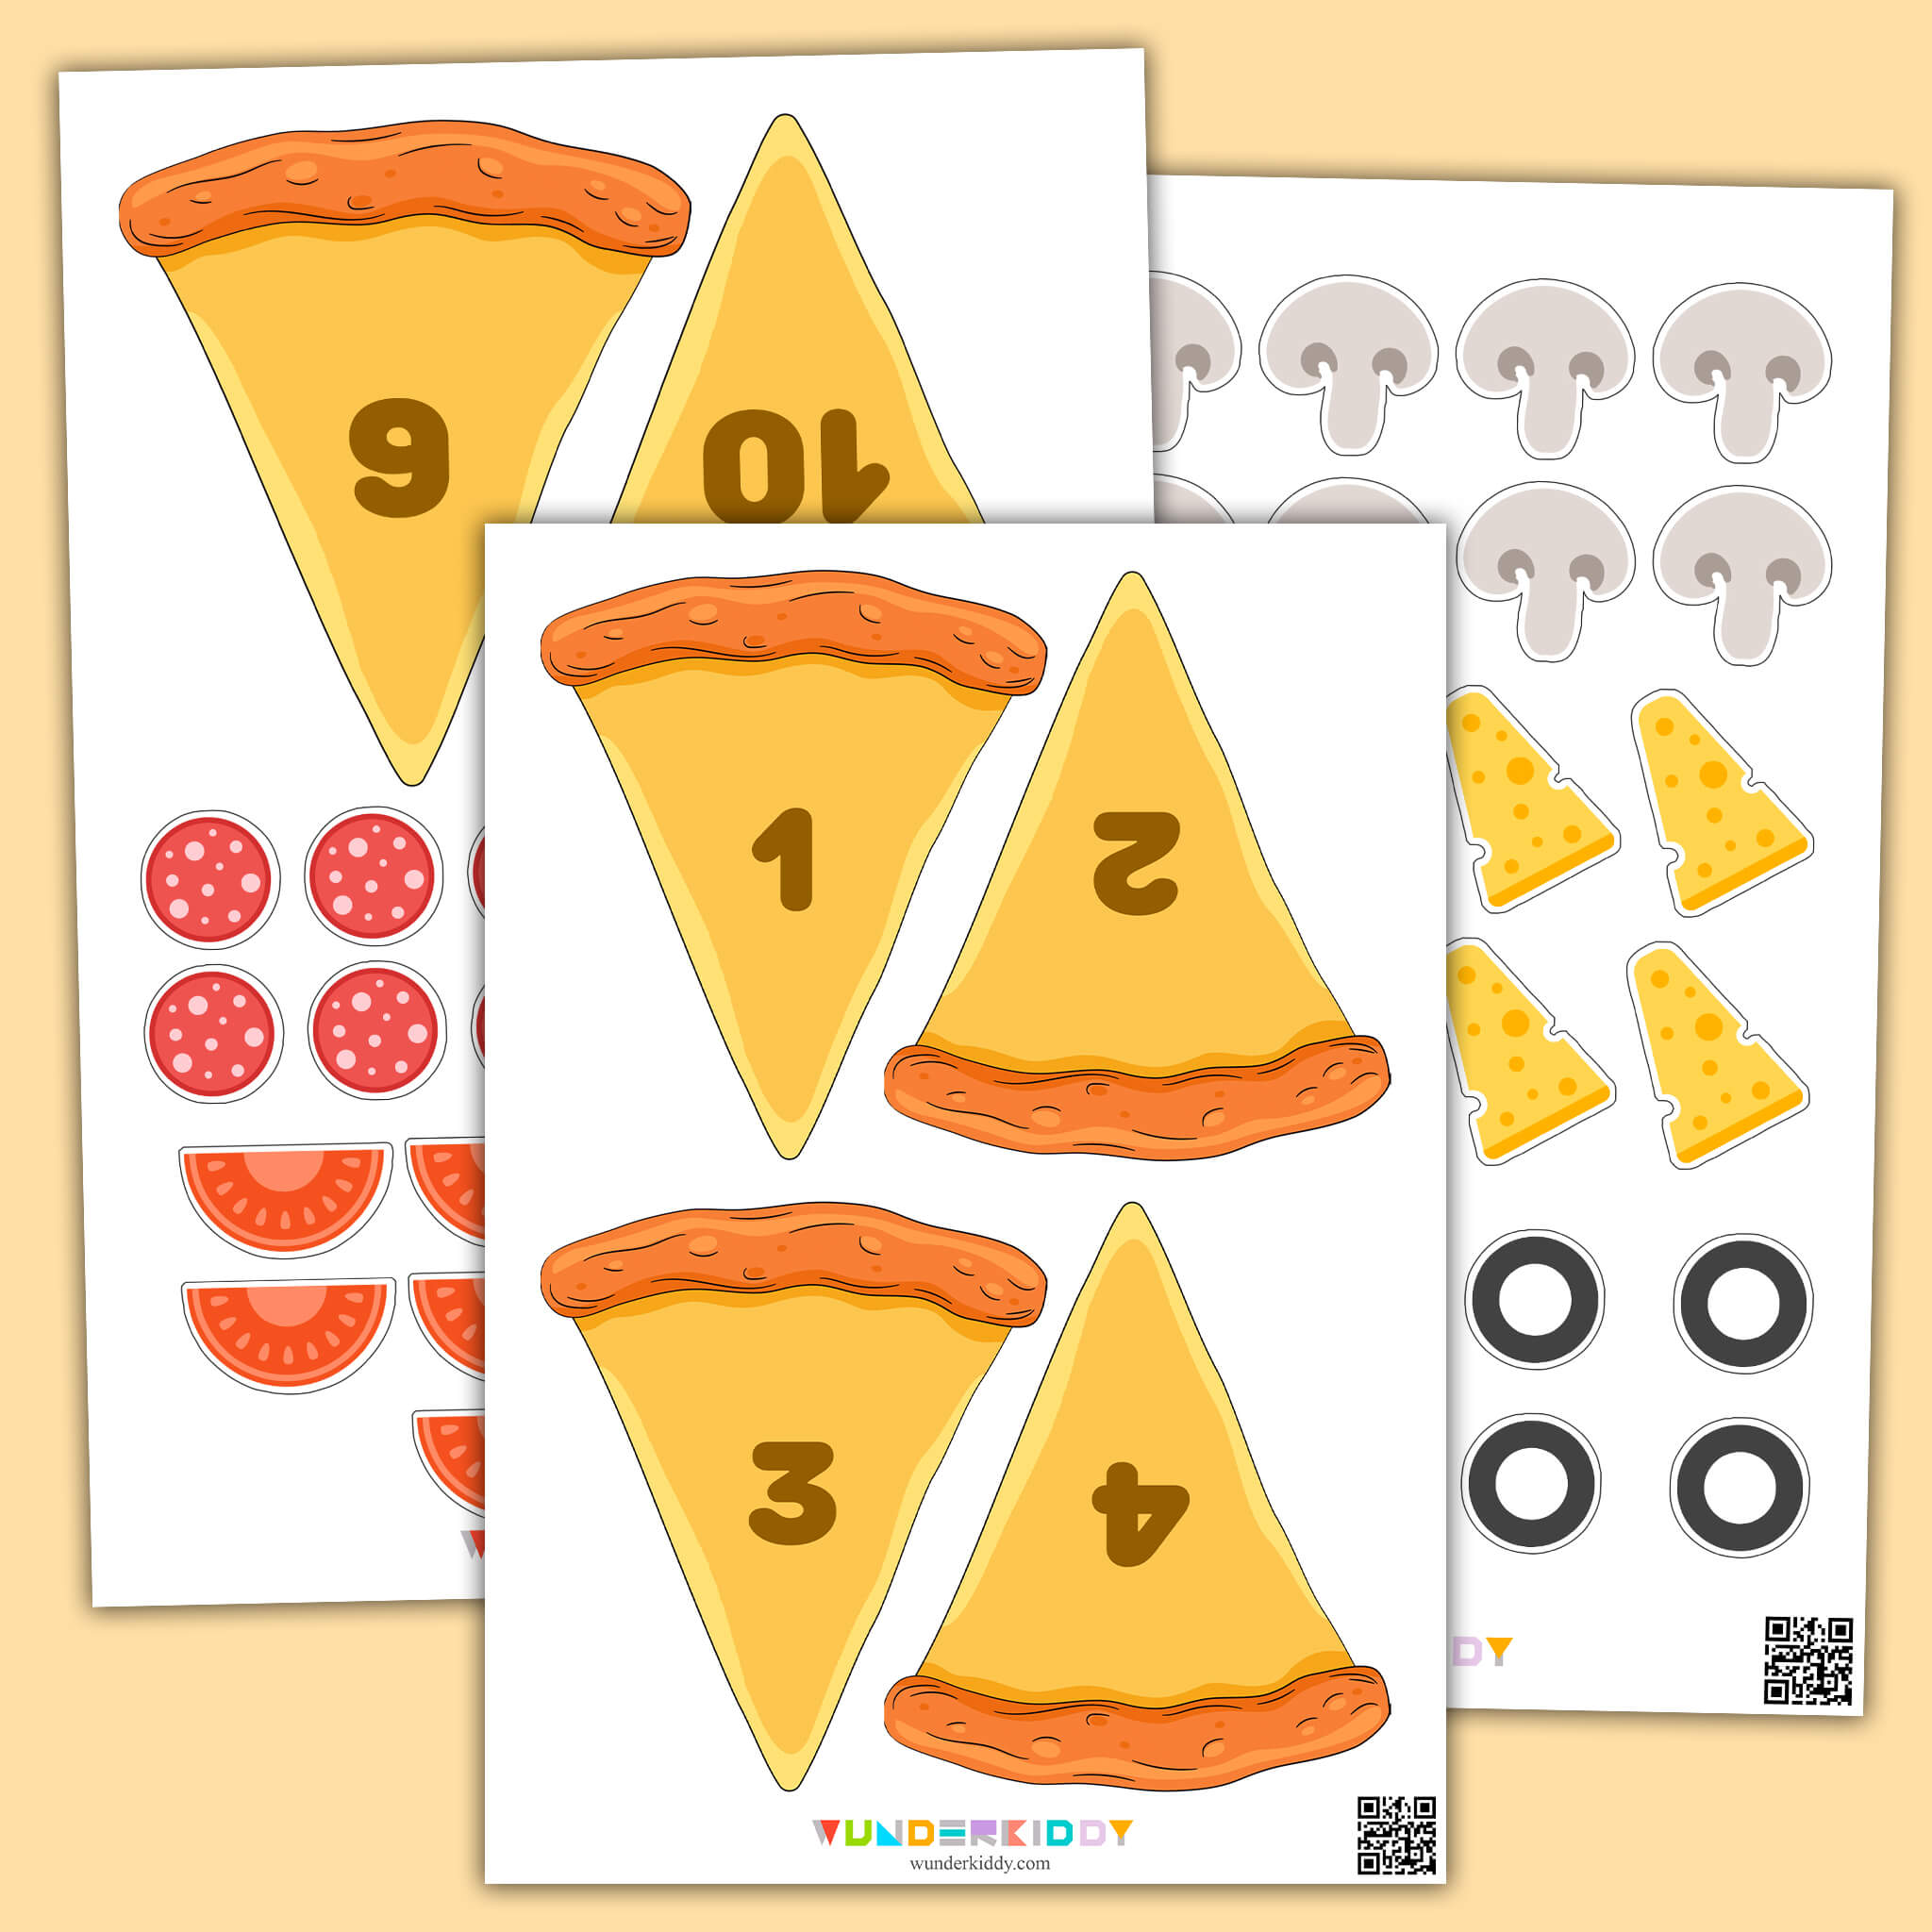 Pizza Counting Activity